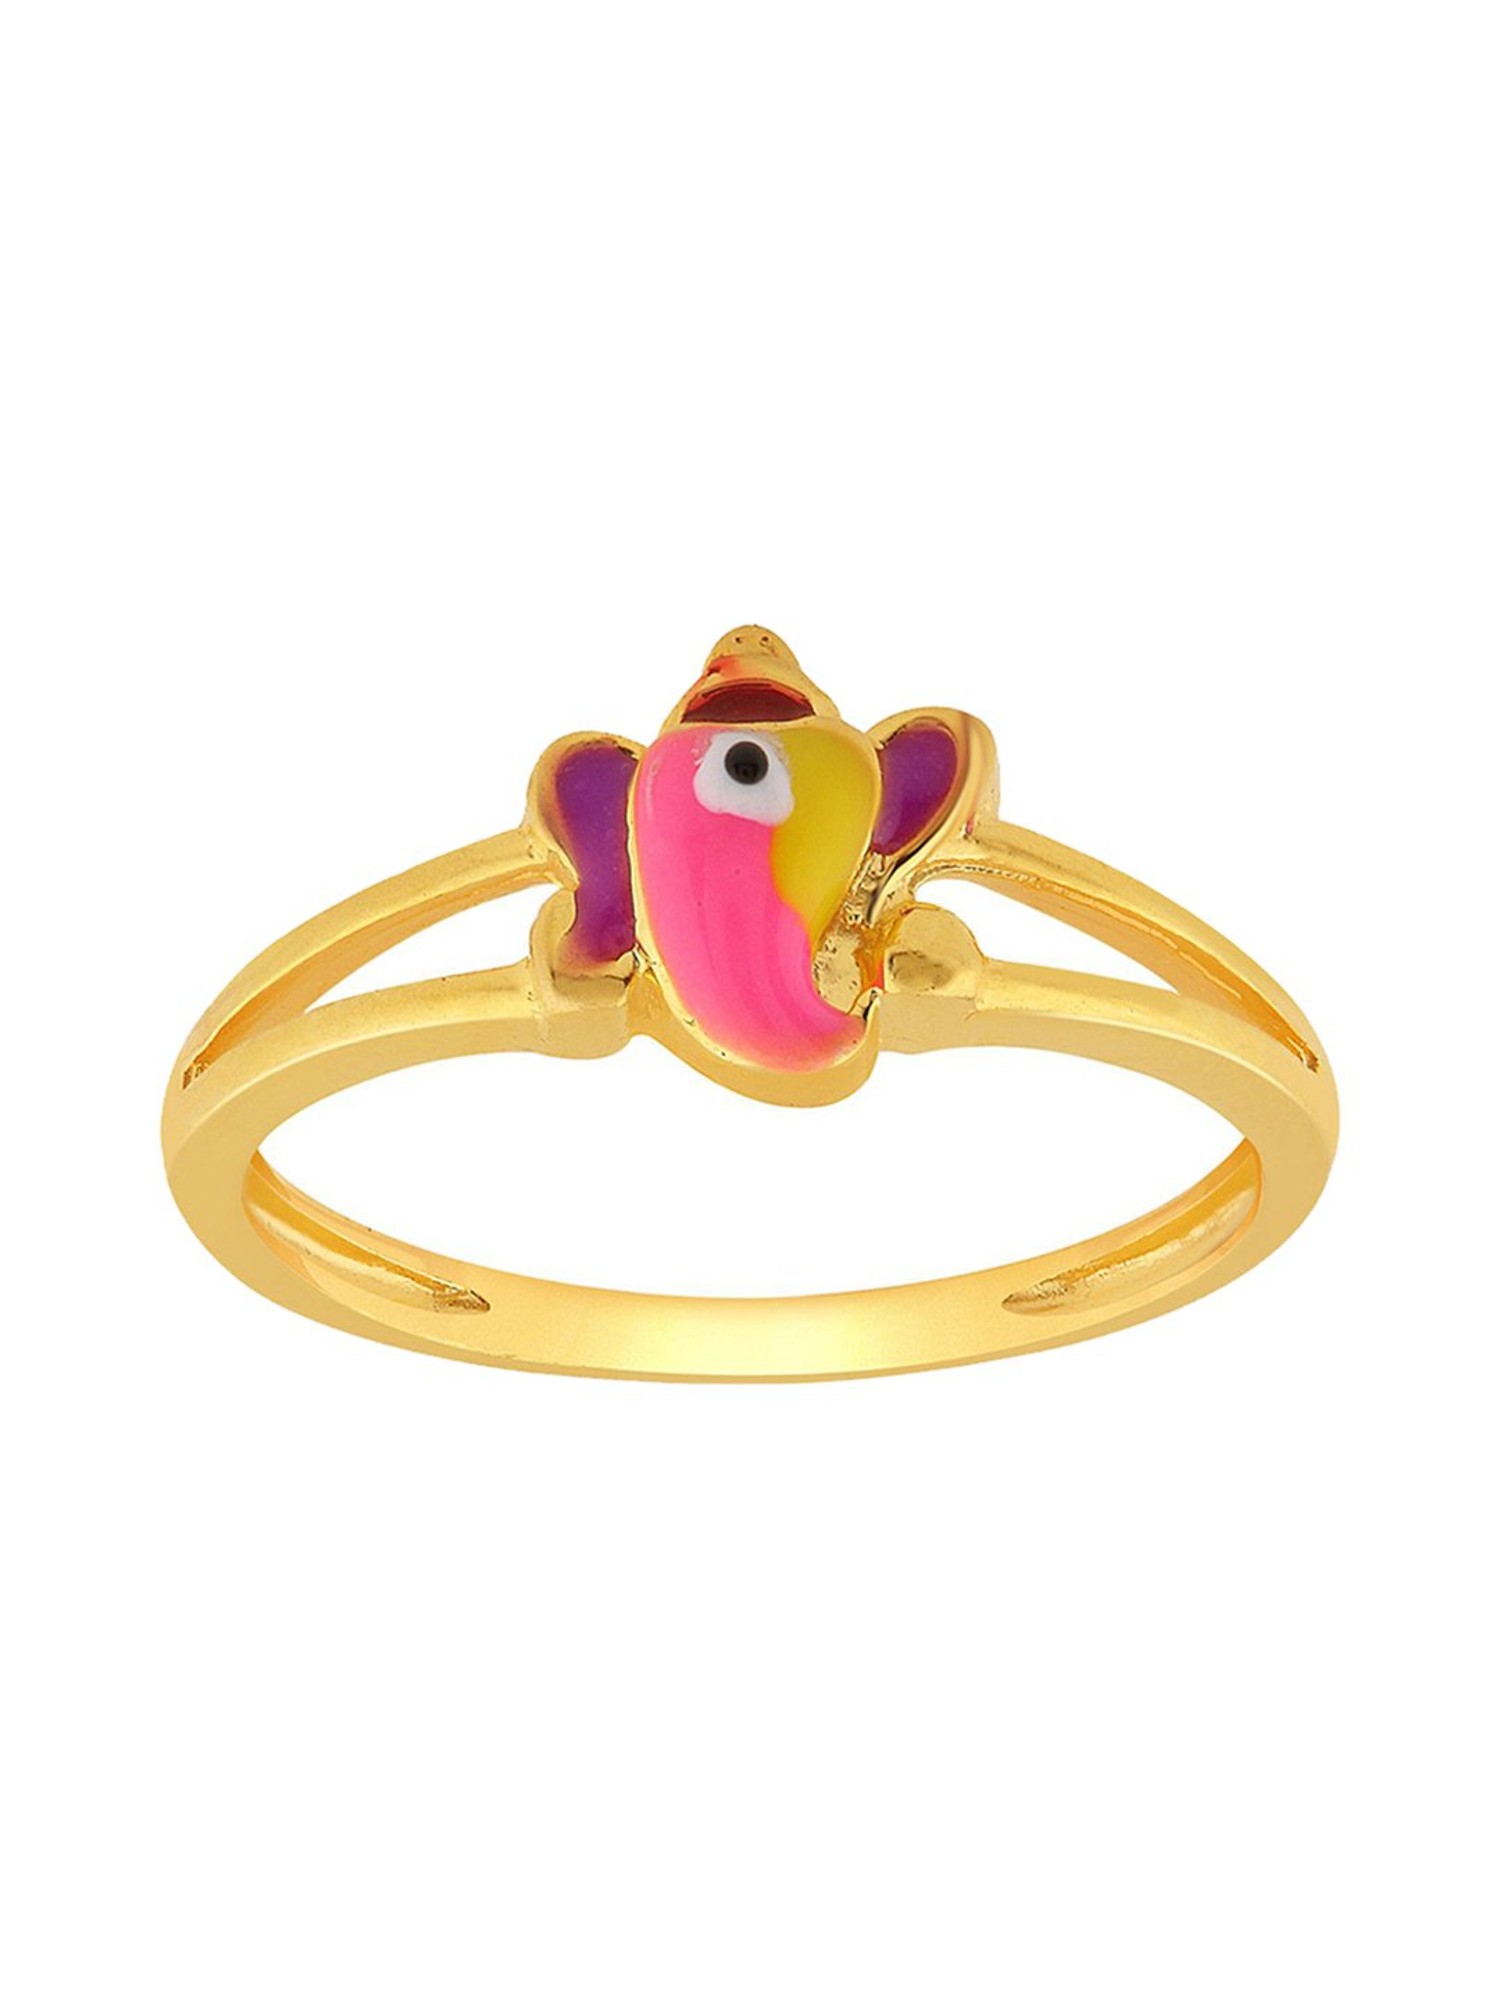 Quirky Rabbit Ring for Kids